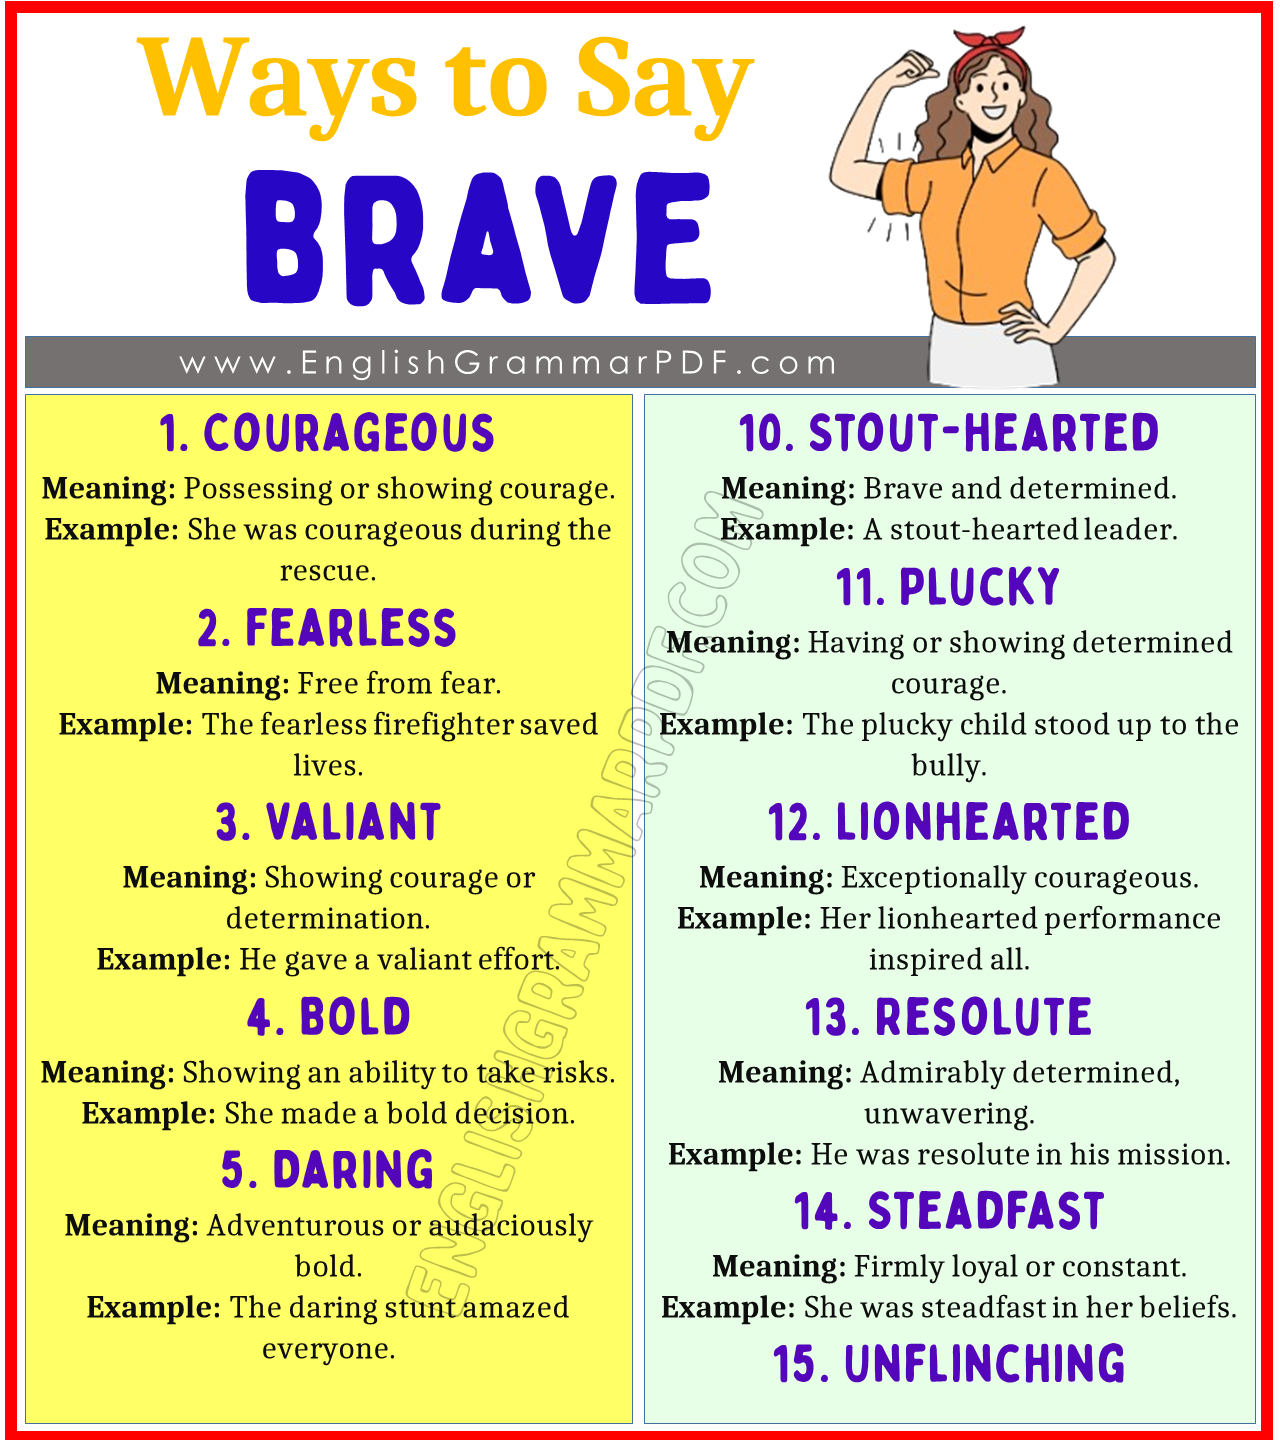 Ways to Say Brave